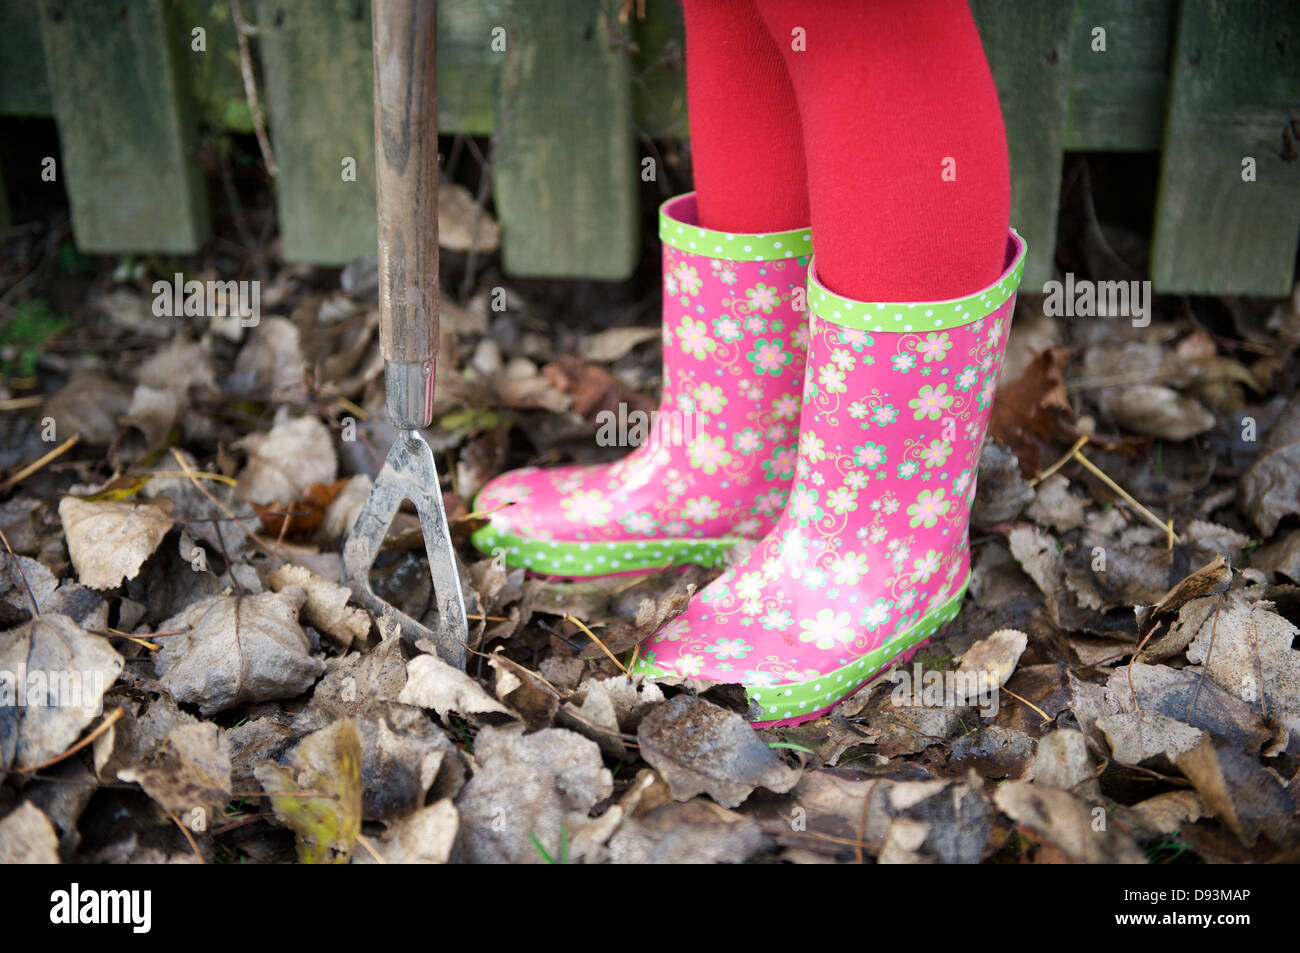 Young child in a pair of pink wellies gardening in a school garden ...